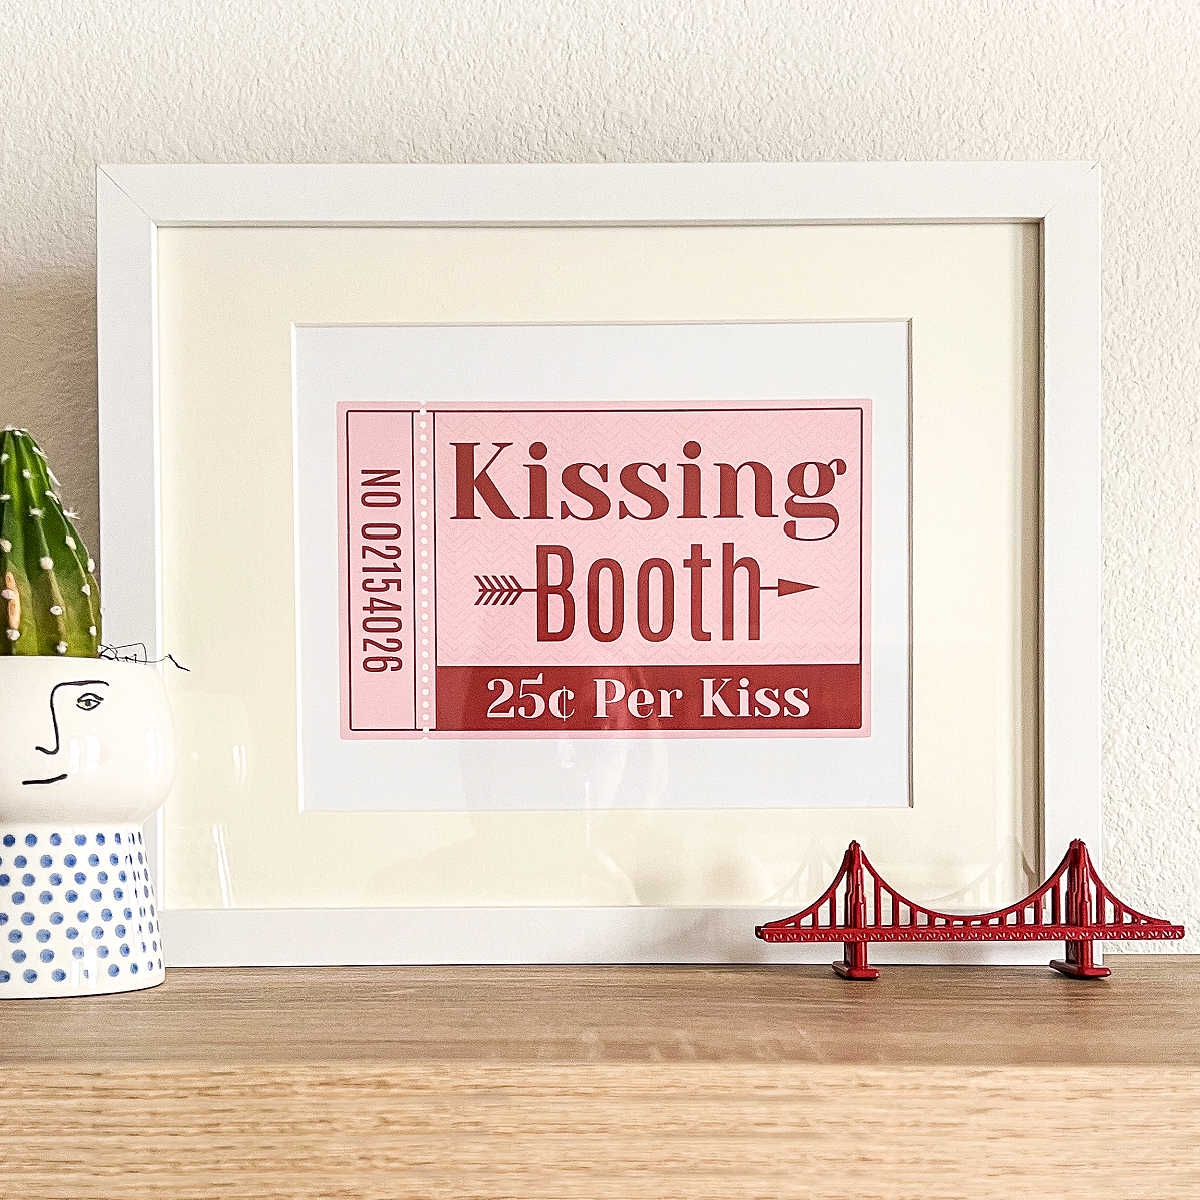 Kissing Booth Sign FREE Printable Hello Little Home